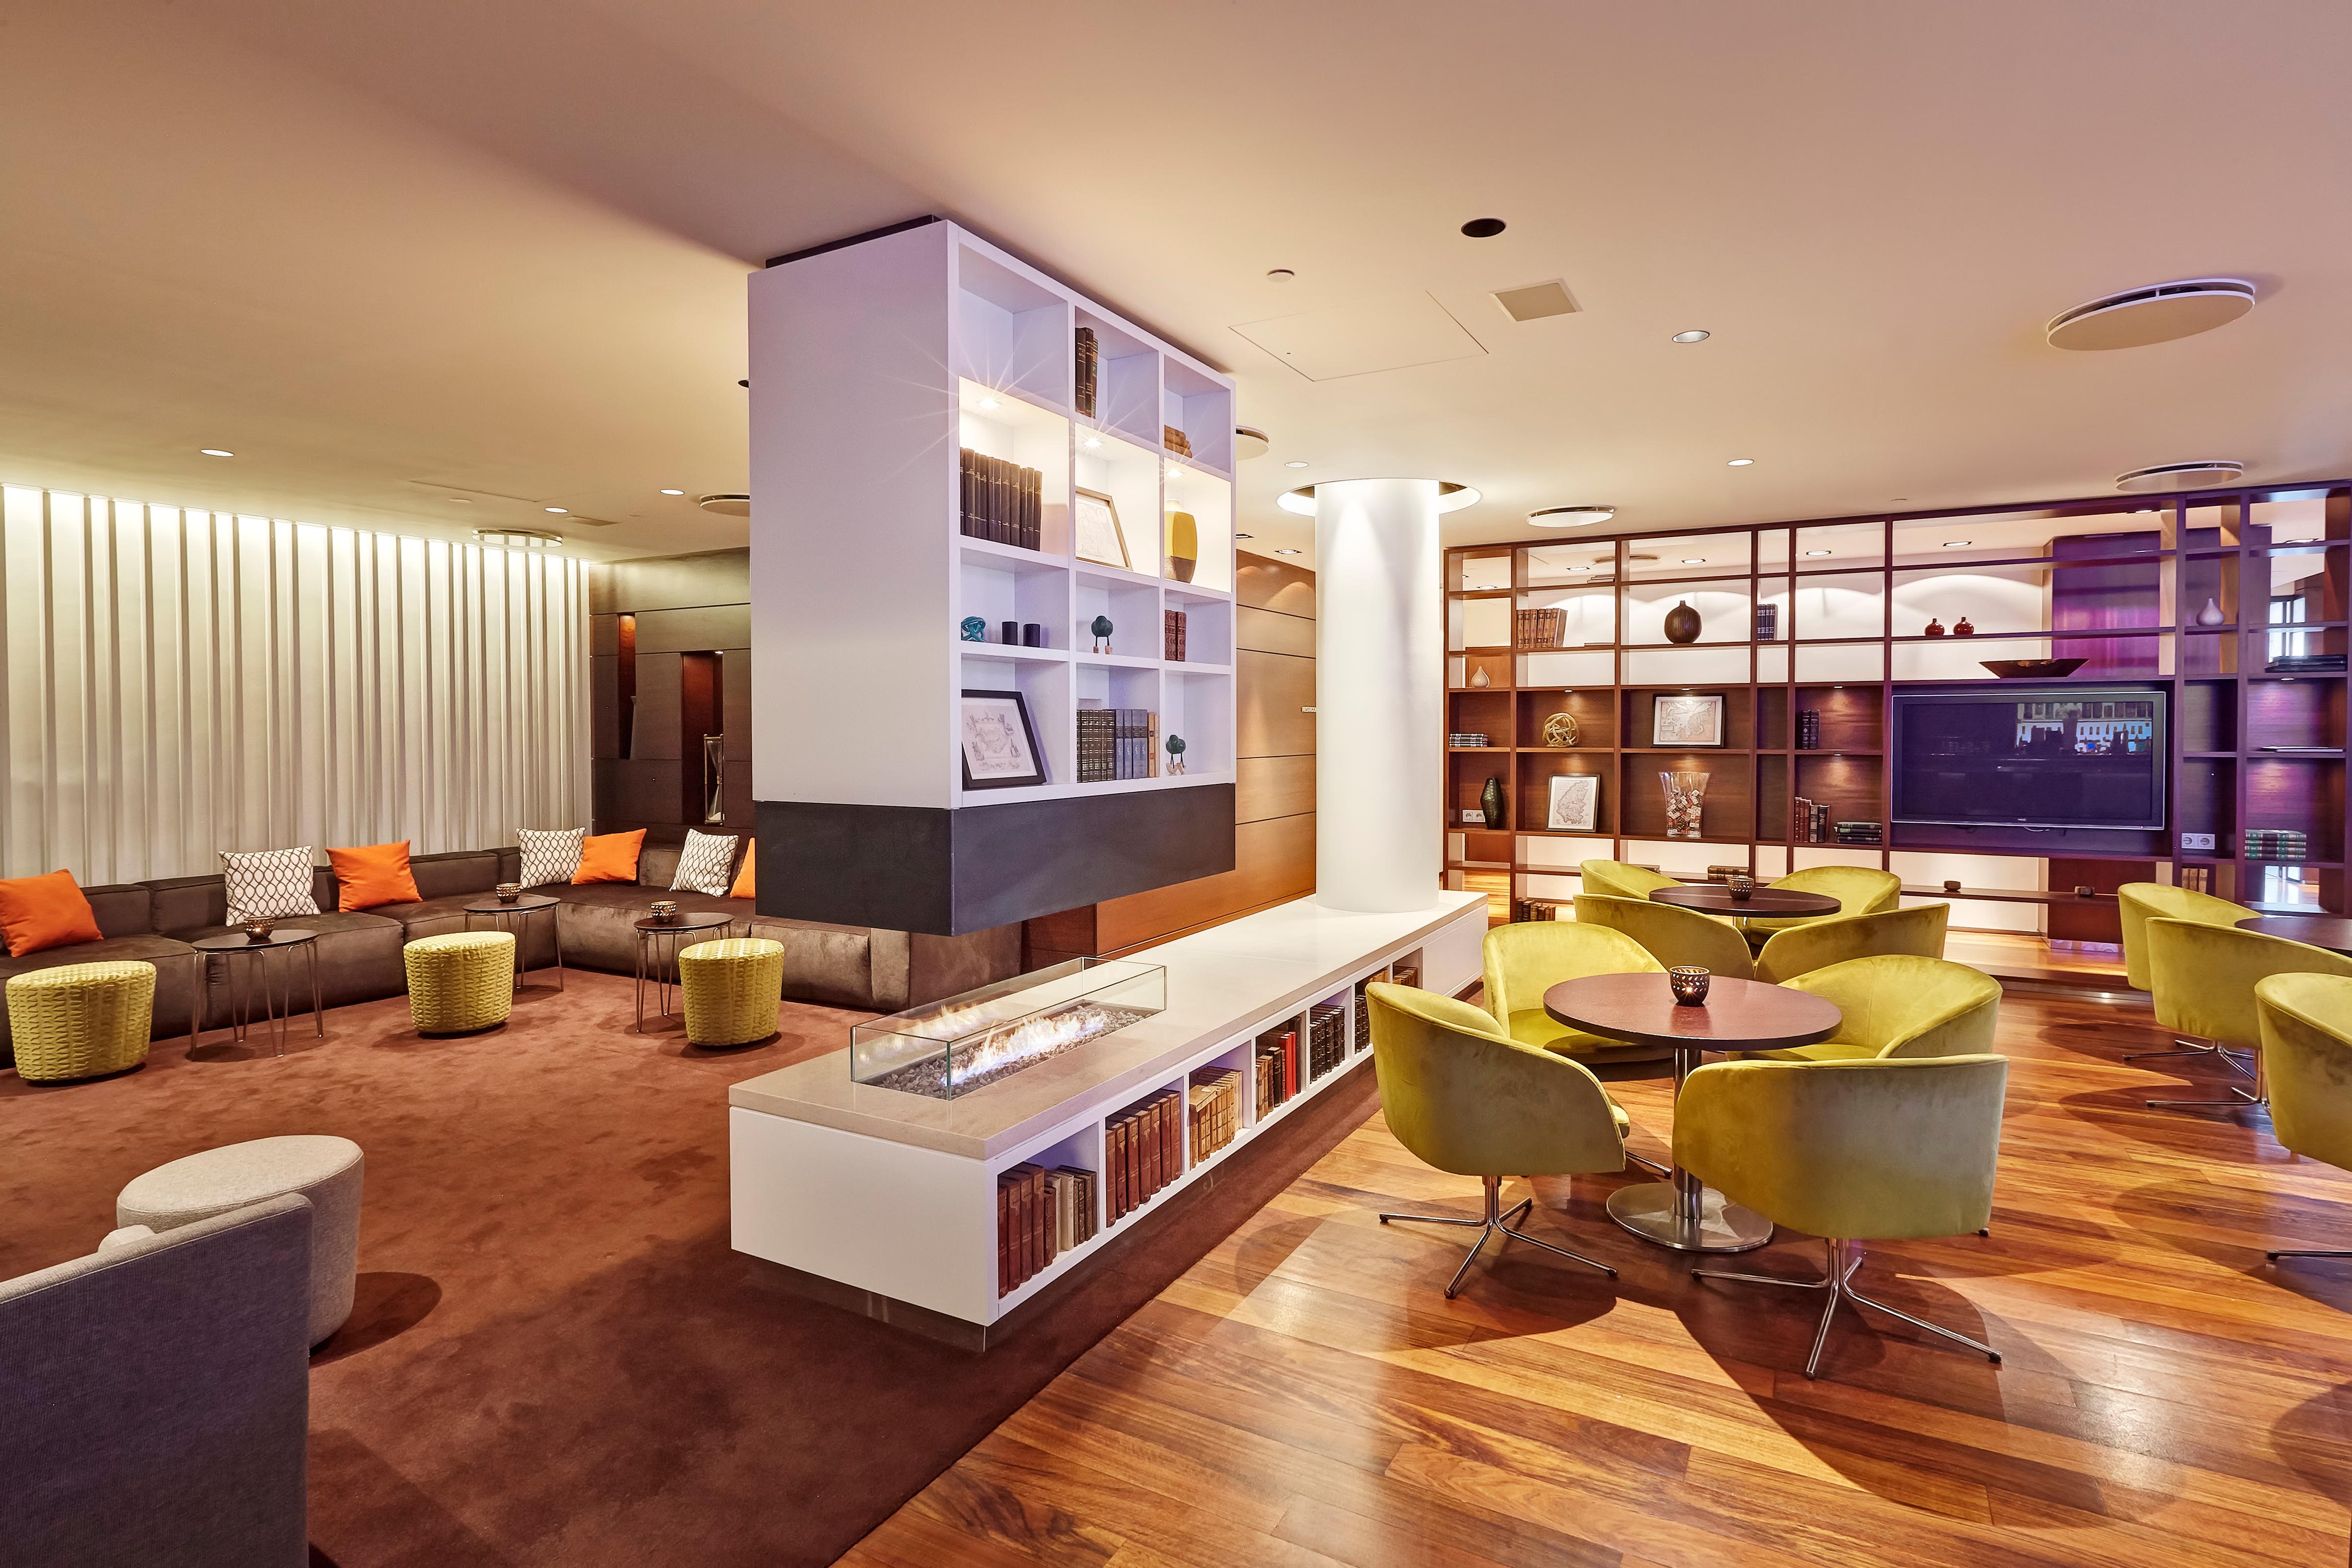 Hotel Meeting Space with Colorful and Modern Furniture